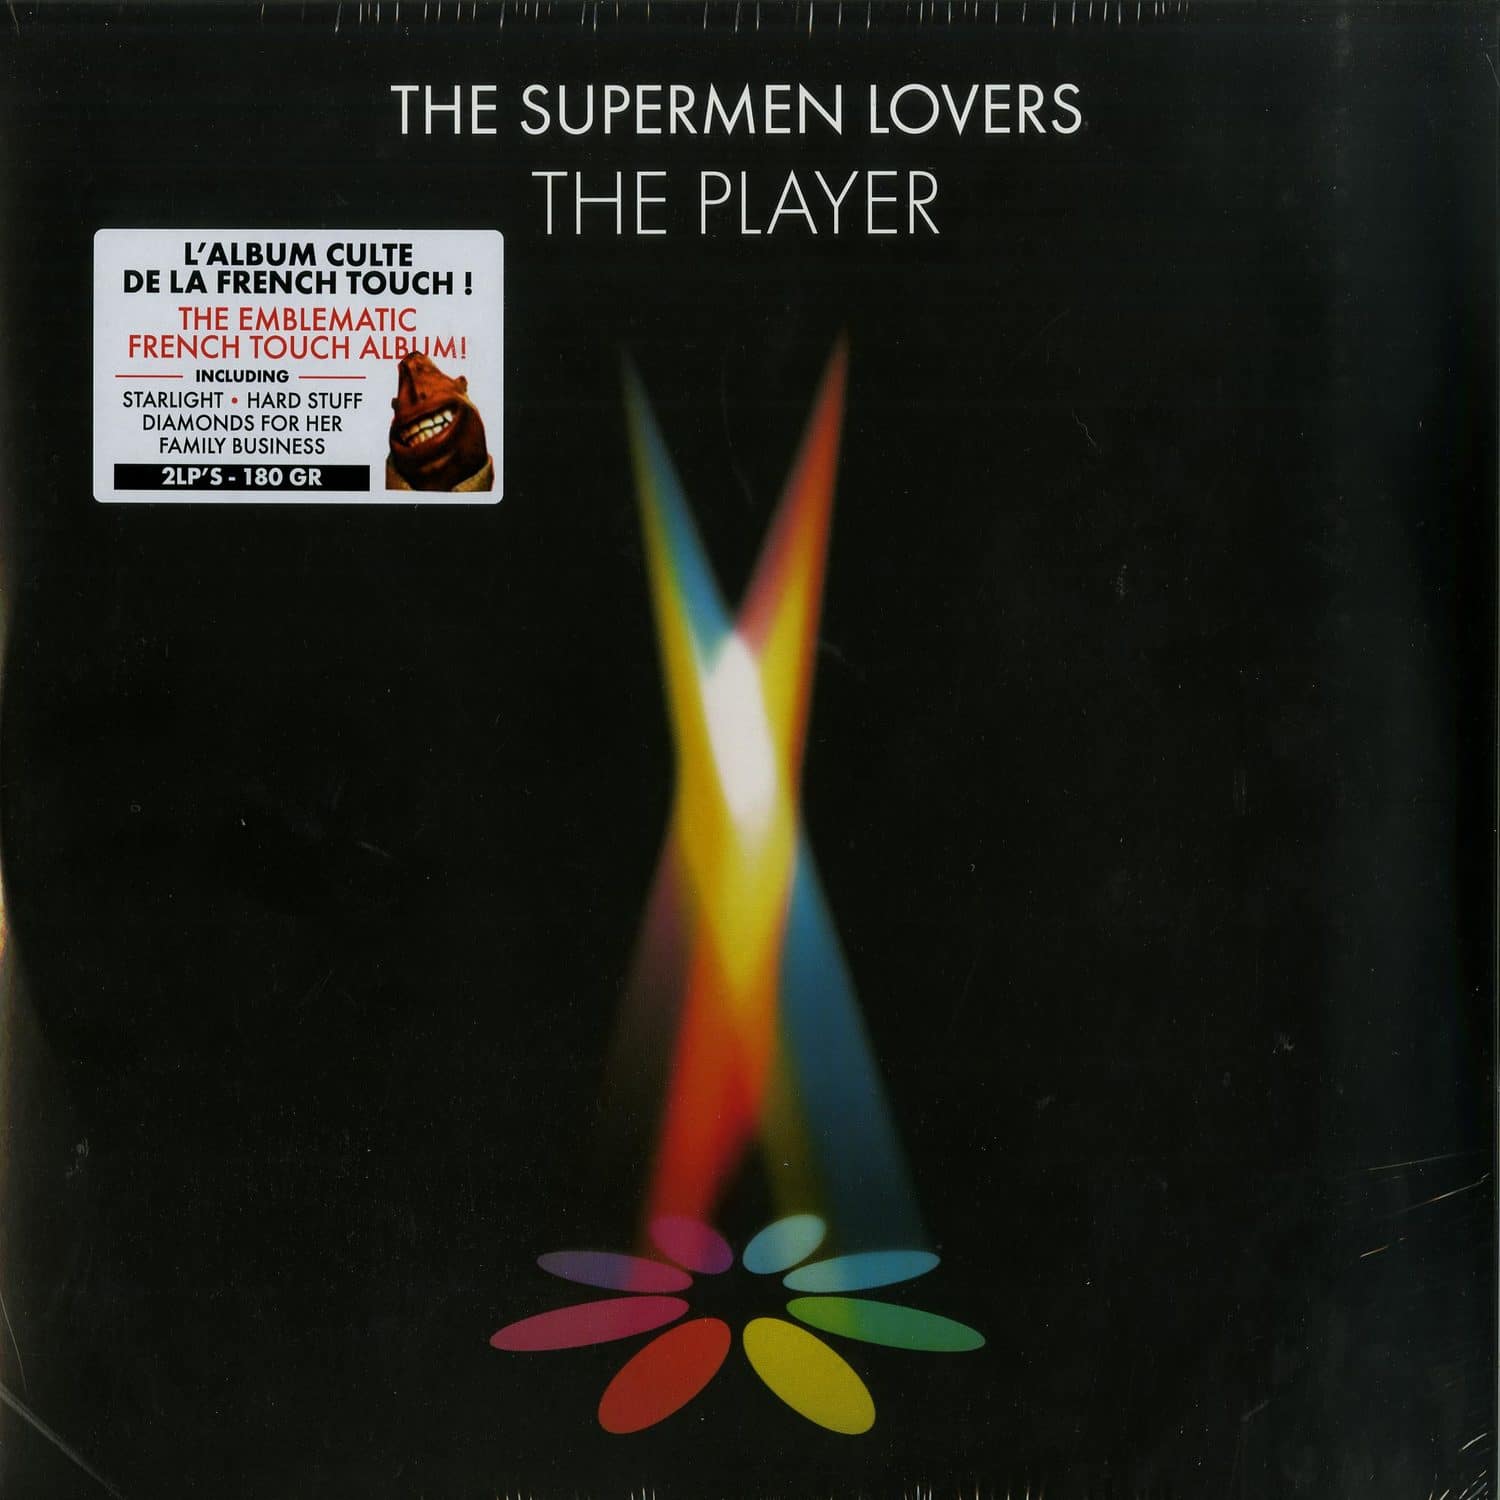 Supermen Lovers - THE PLAYER 